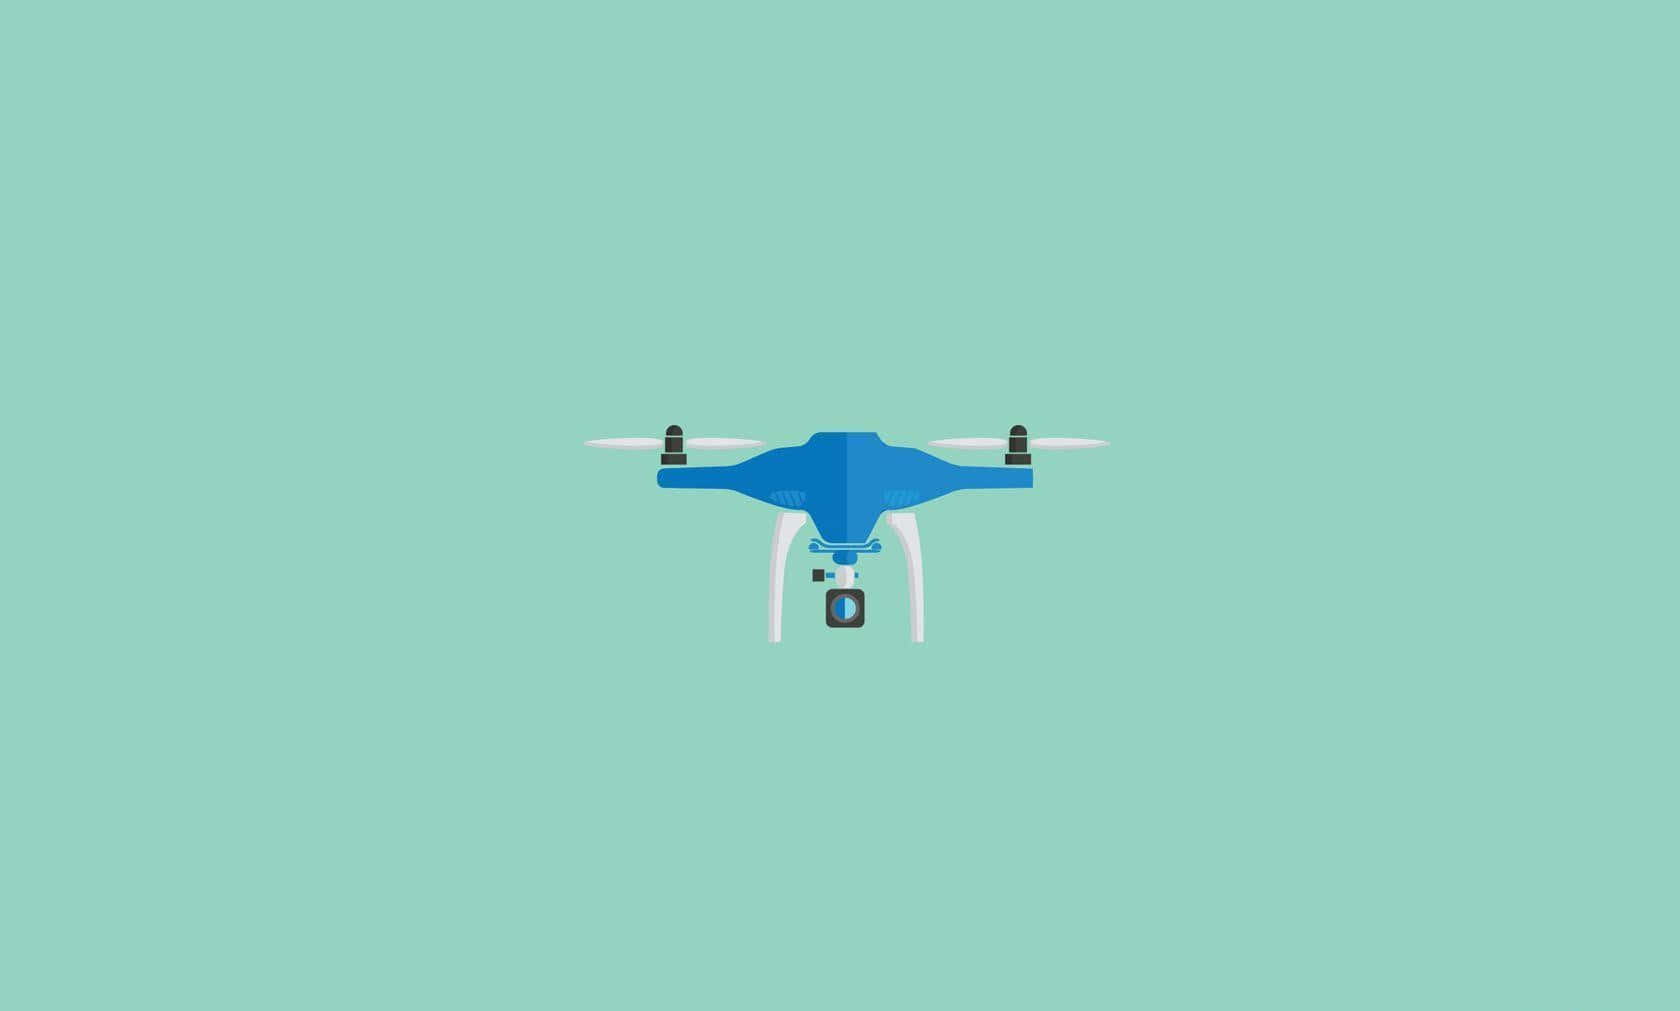 Blue Drone Isolatedon Teal Background Wallpaper